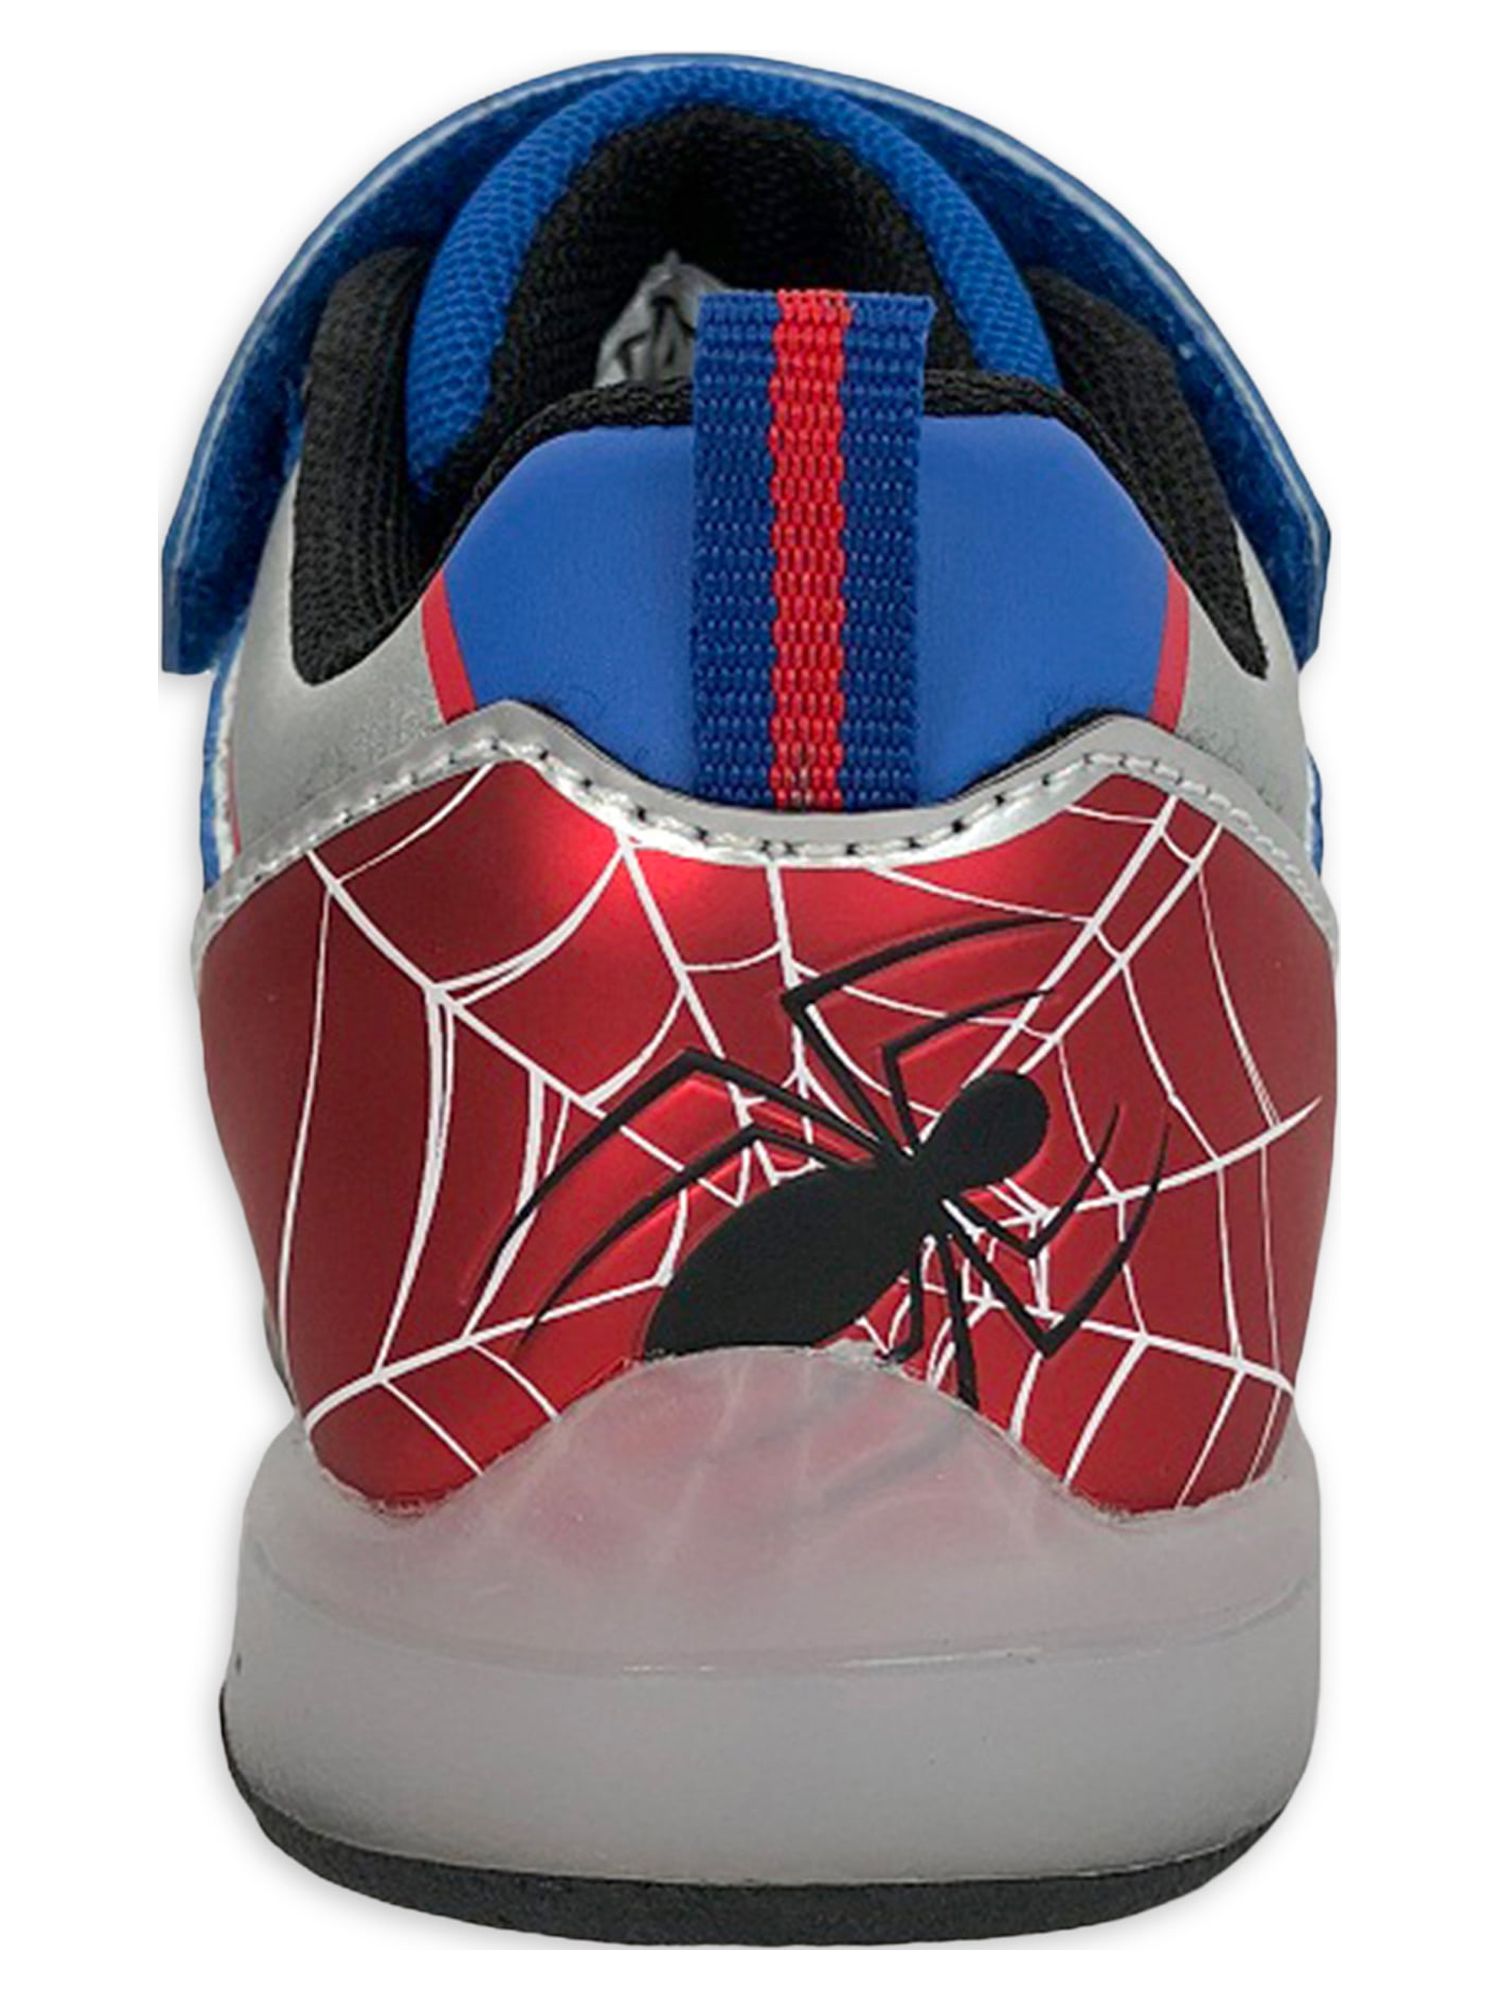 Spider-Man Toddler Boys License Light Up Casual Shoe, Sizes 7-13 - image 3 of 7